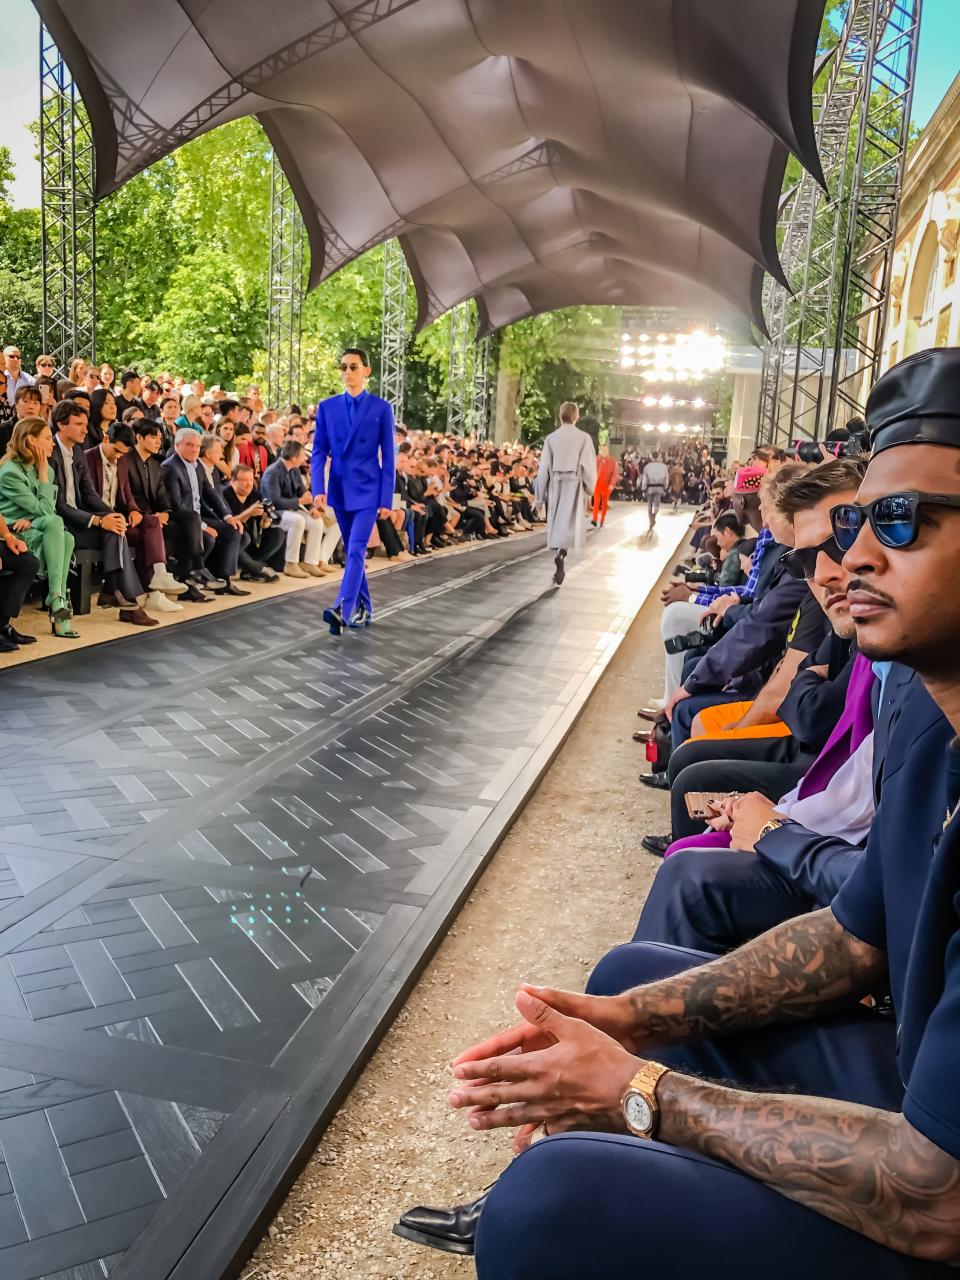 <h1 class="title">Berluti’s Spring 2020 show was amazing! Eye-catching colors, cool silhouettes! I love the way Kris [Van Assche] infuses the signature Berluti look with fresh designs.</h1><cite class="credit">Photo: Rae-Vaughn Lucas / Courtesy of Carmelo Anthony</cite>